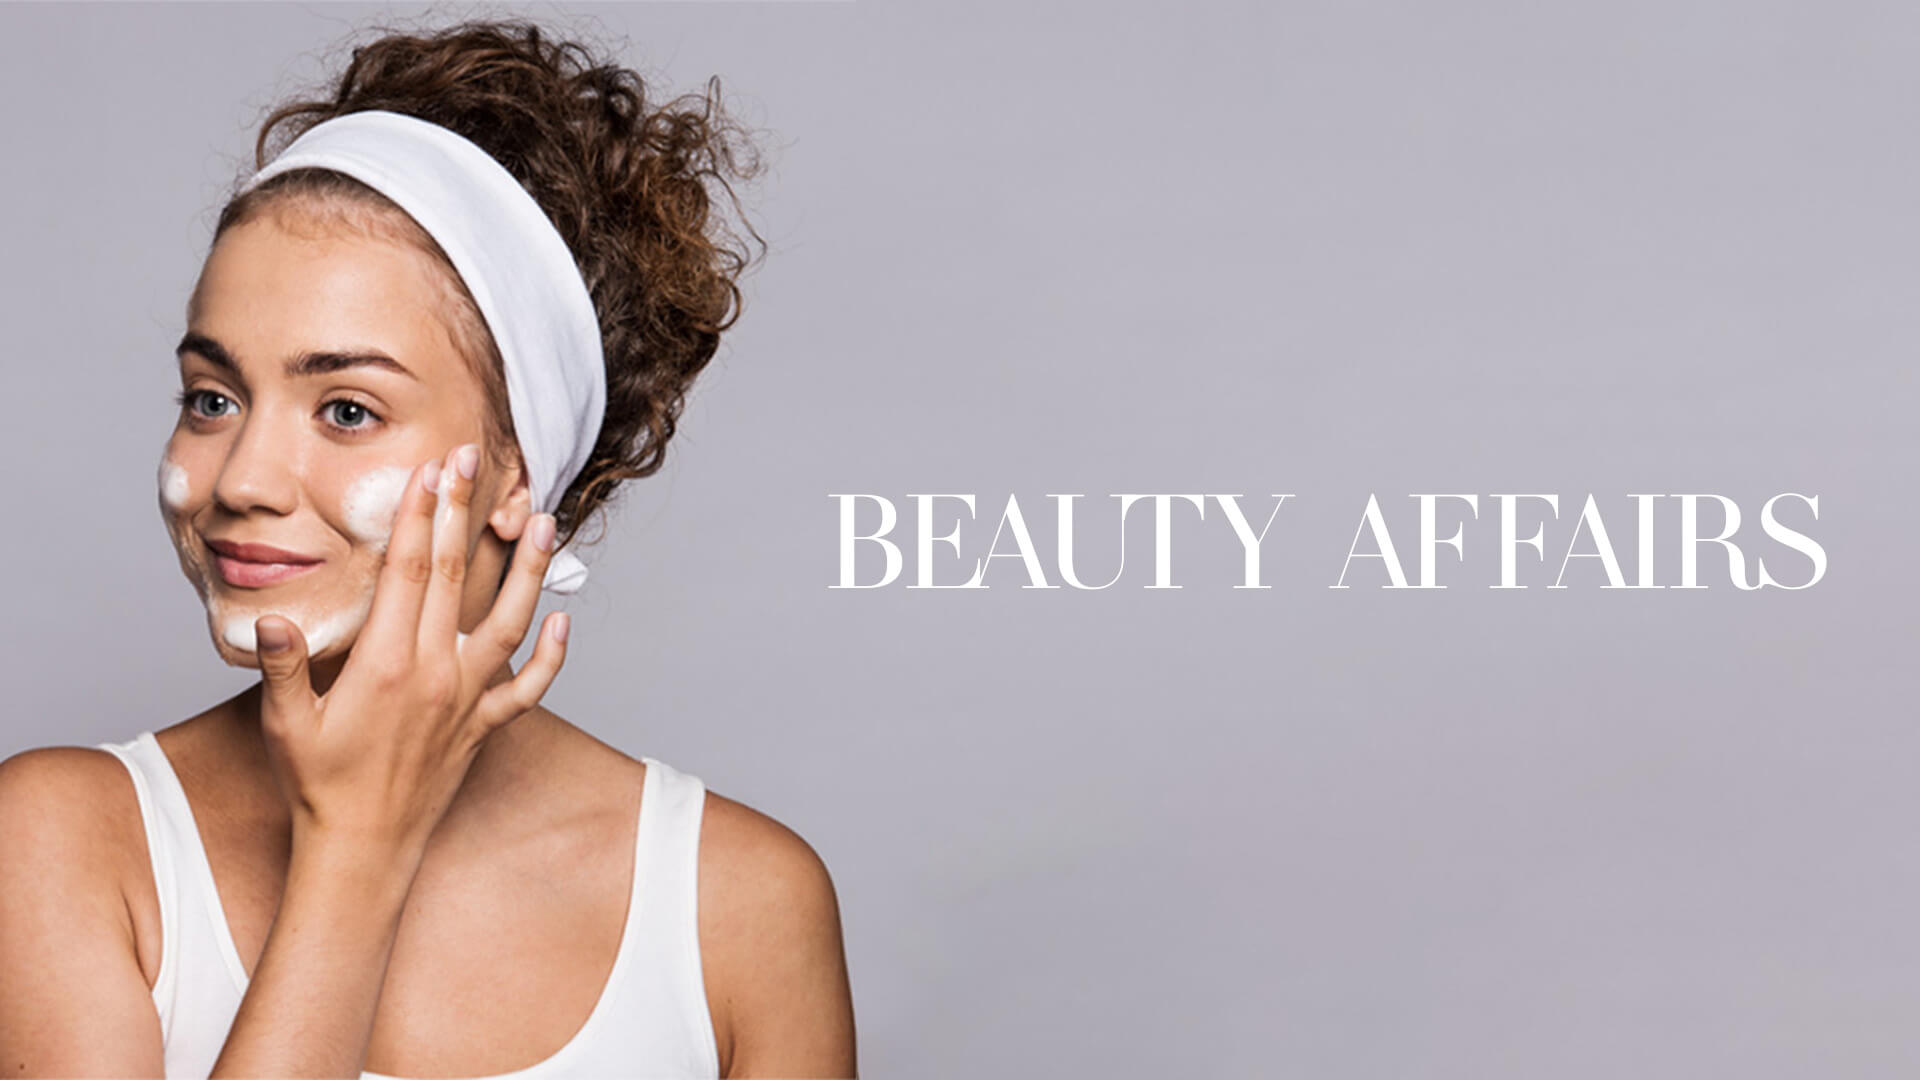 Woman applying cream to her face. Beauty Affairs company logo is to the right side of the image